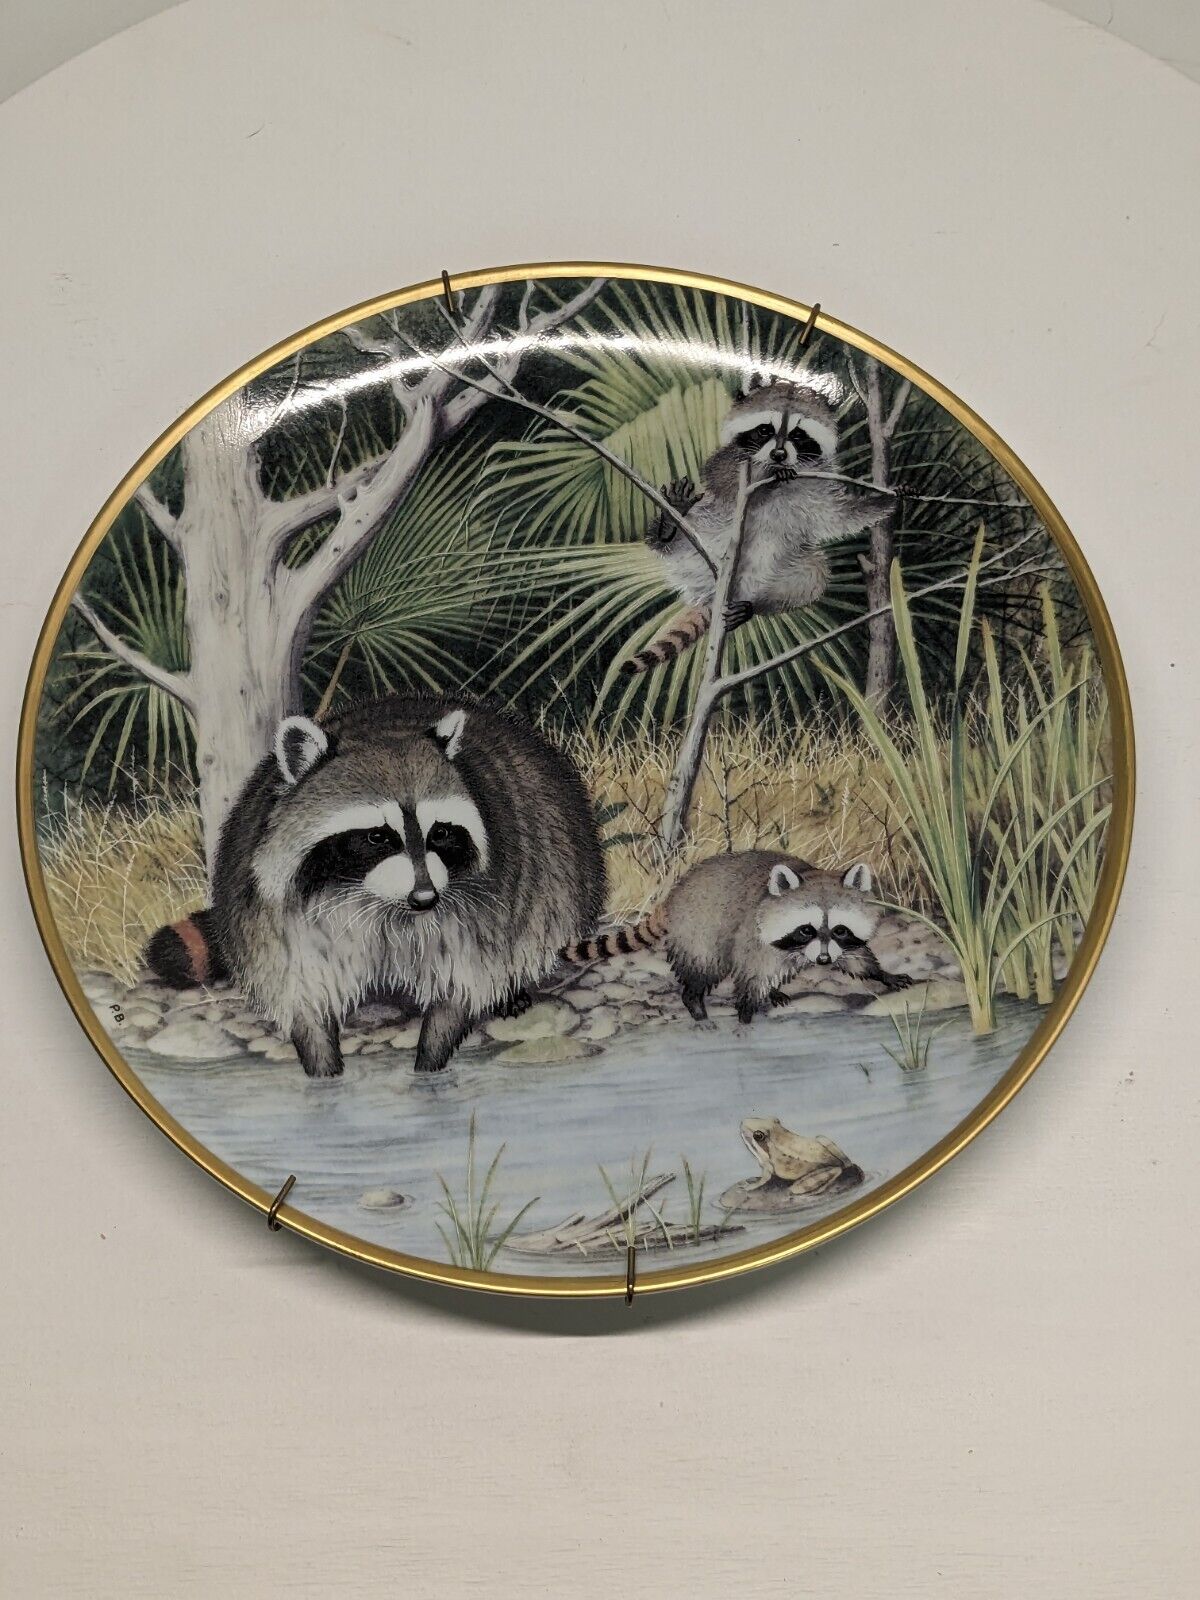 The Woodland Year - Curious Raccoons At An April Pond -Peter Barrett FP Plate...